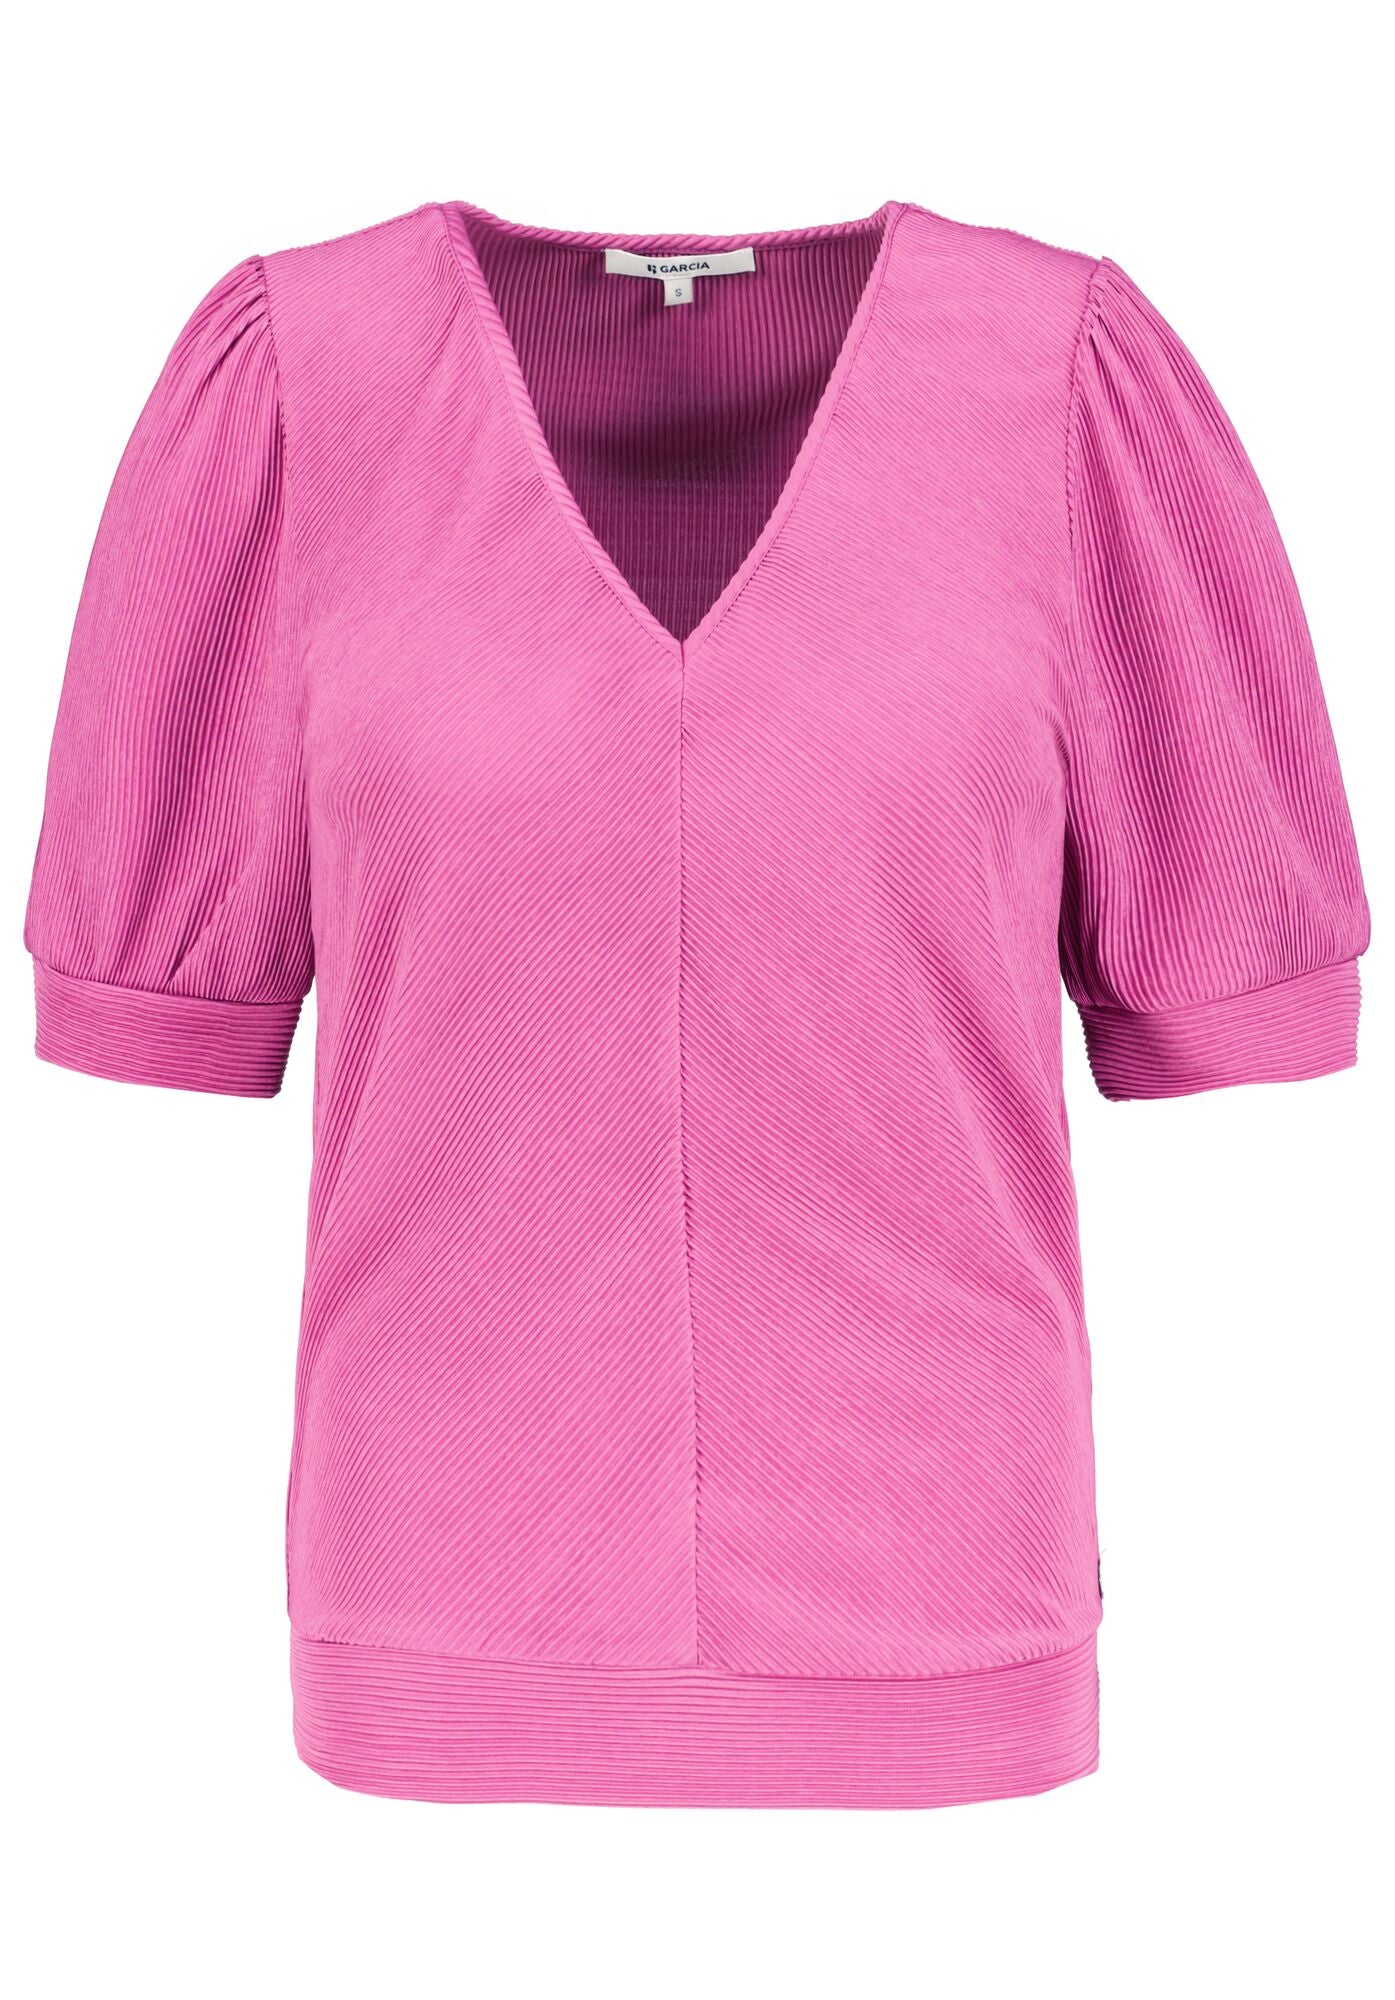 Garcia G30008 pink v-neck top with puff sleeves